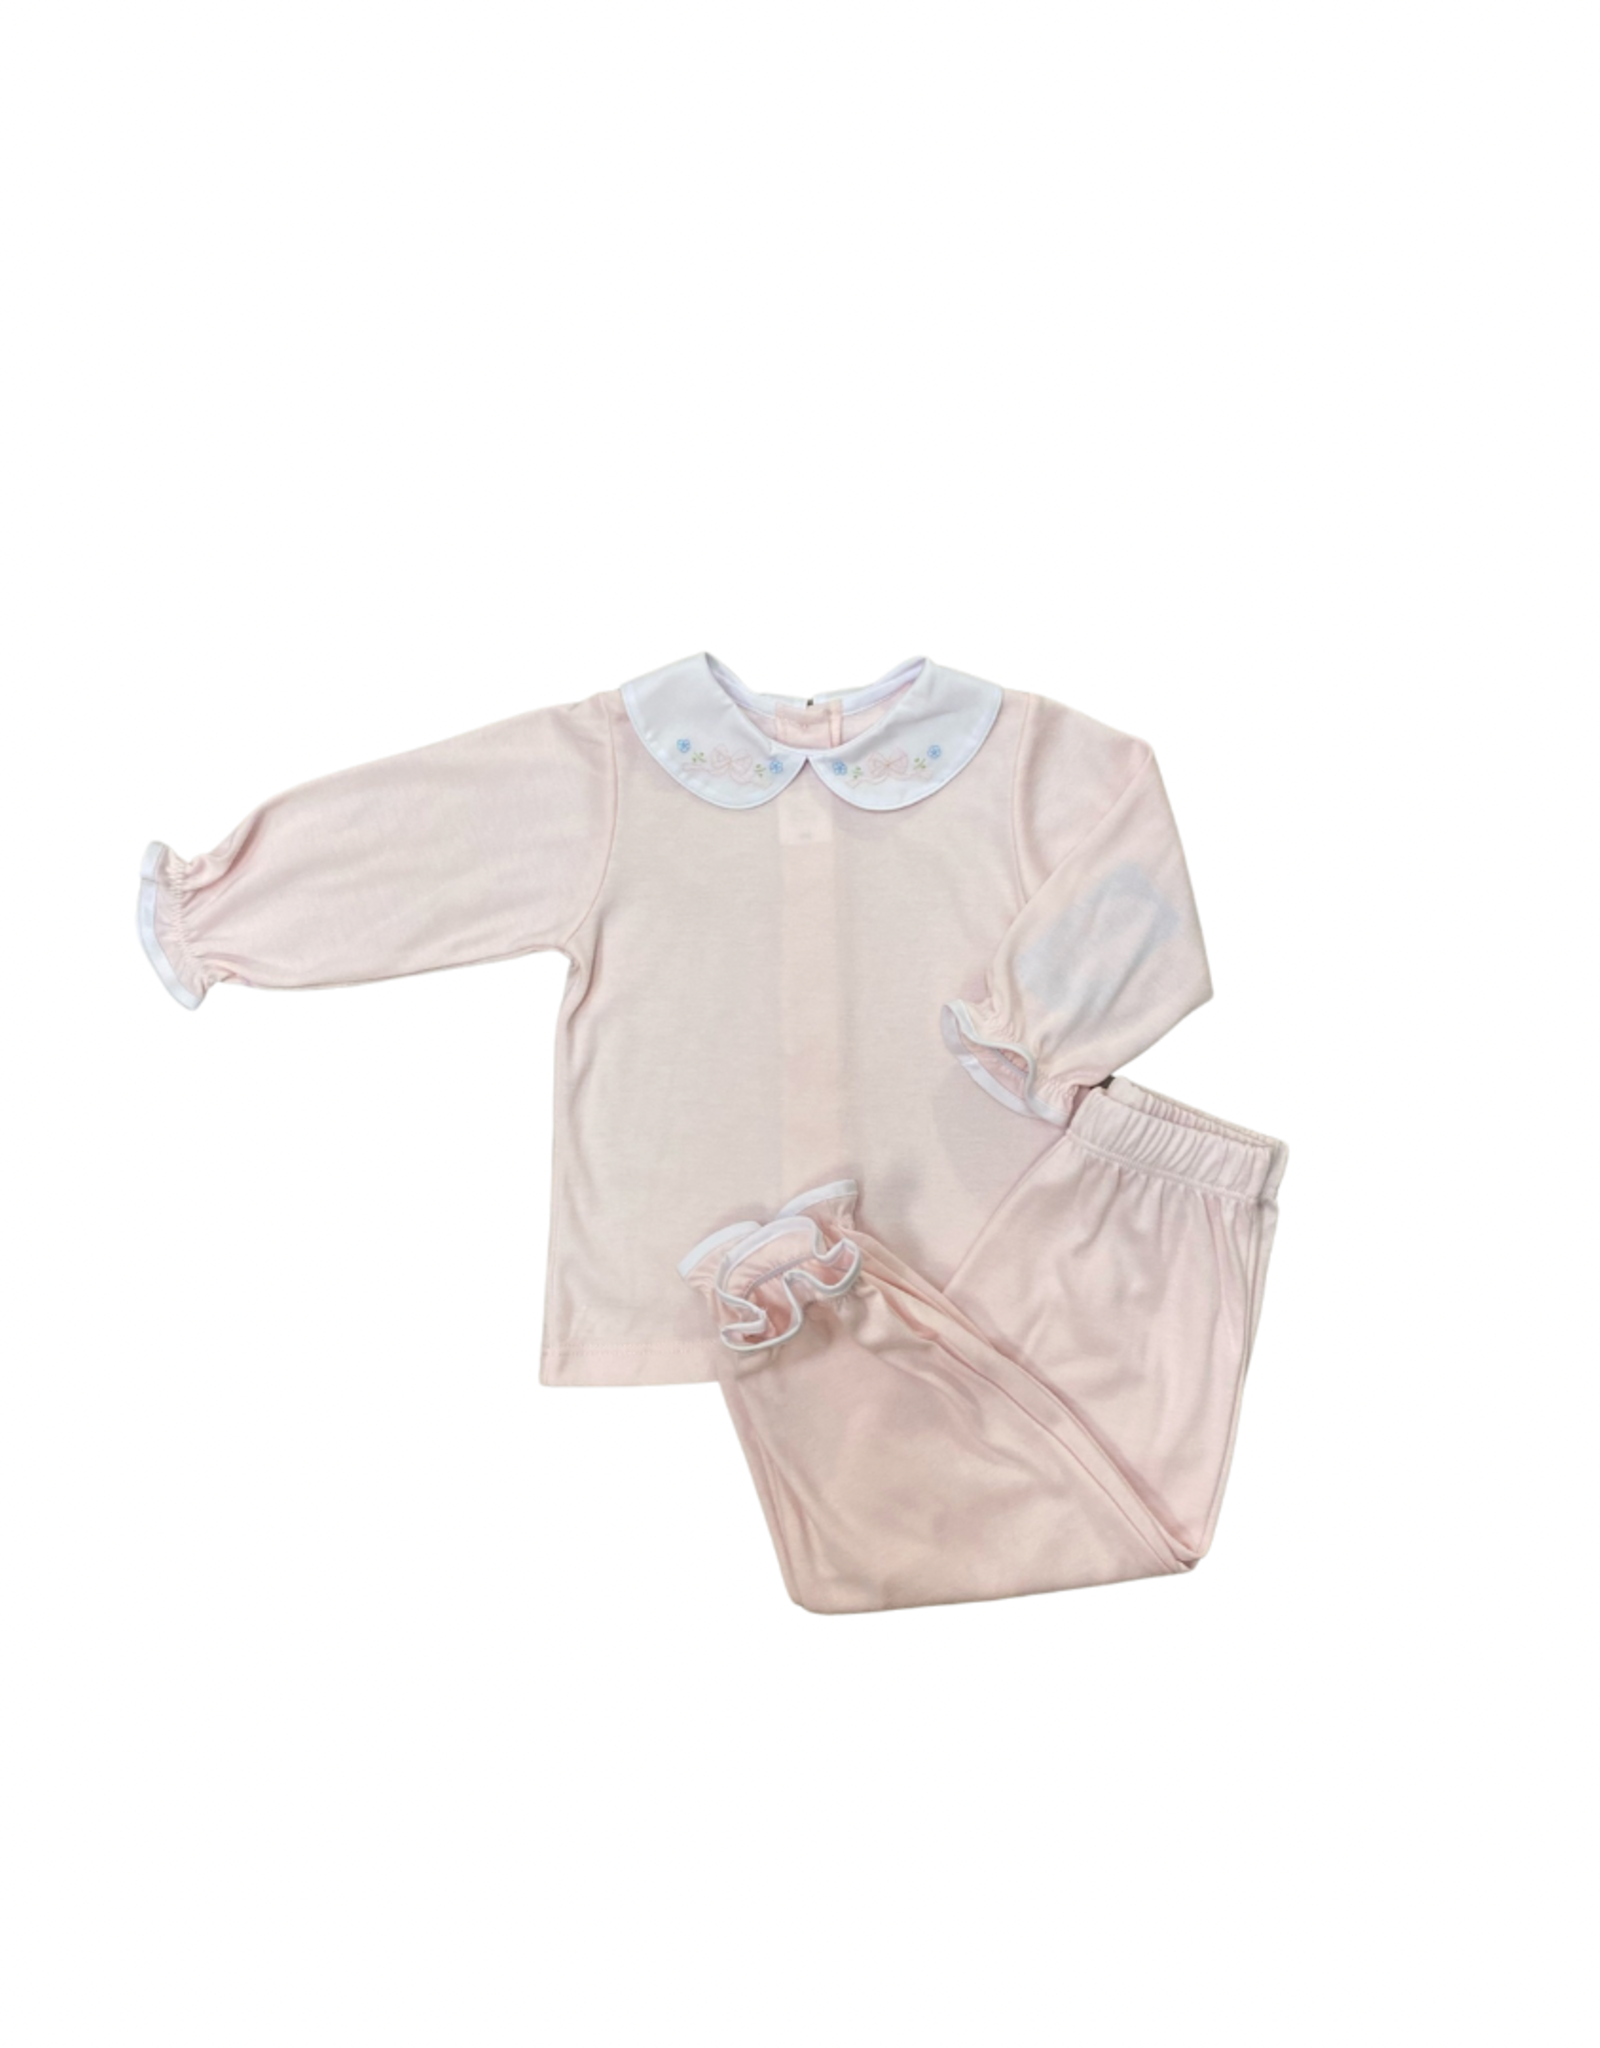 Auraluz Knit Pink Two Piece Set With Tiny Bows